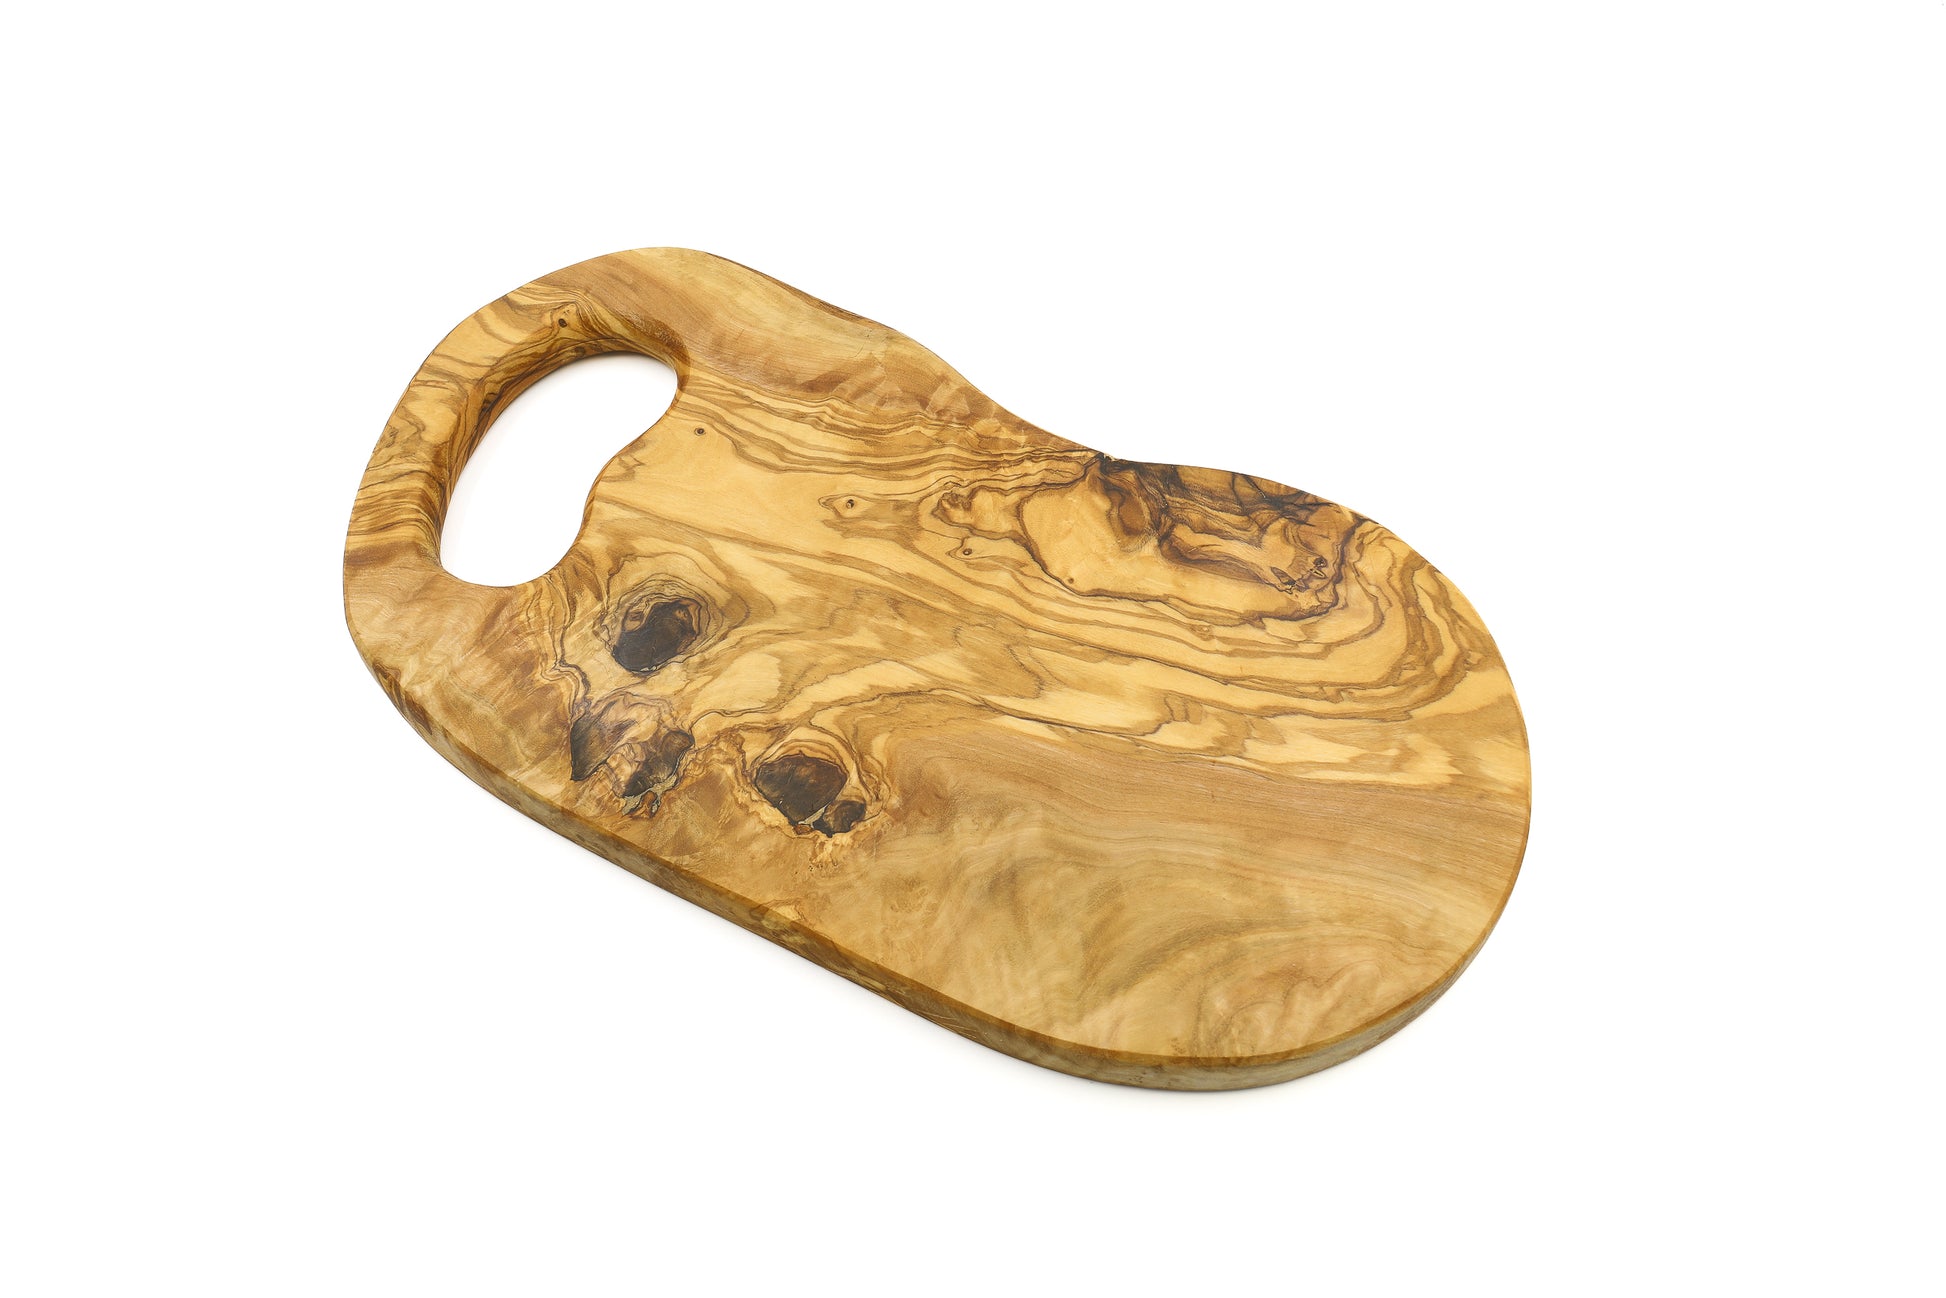 Olive wood cutting board featuring a natural in-hand handle